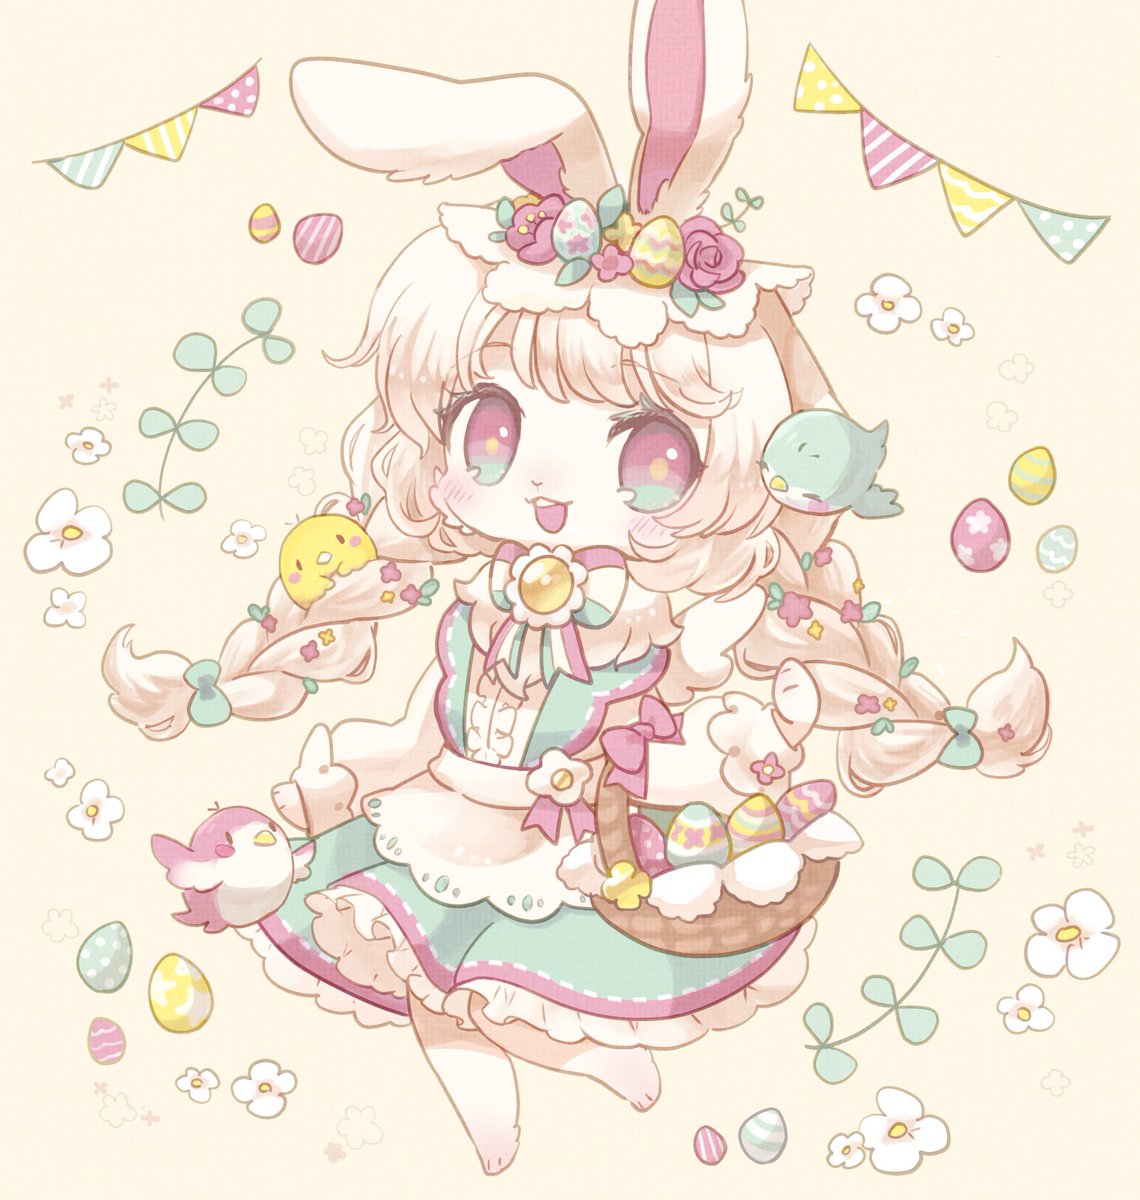 「Happy Easter!??? 」|岡森くおのイラスト